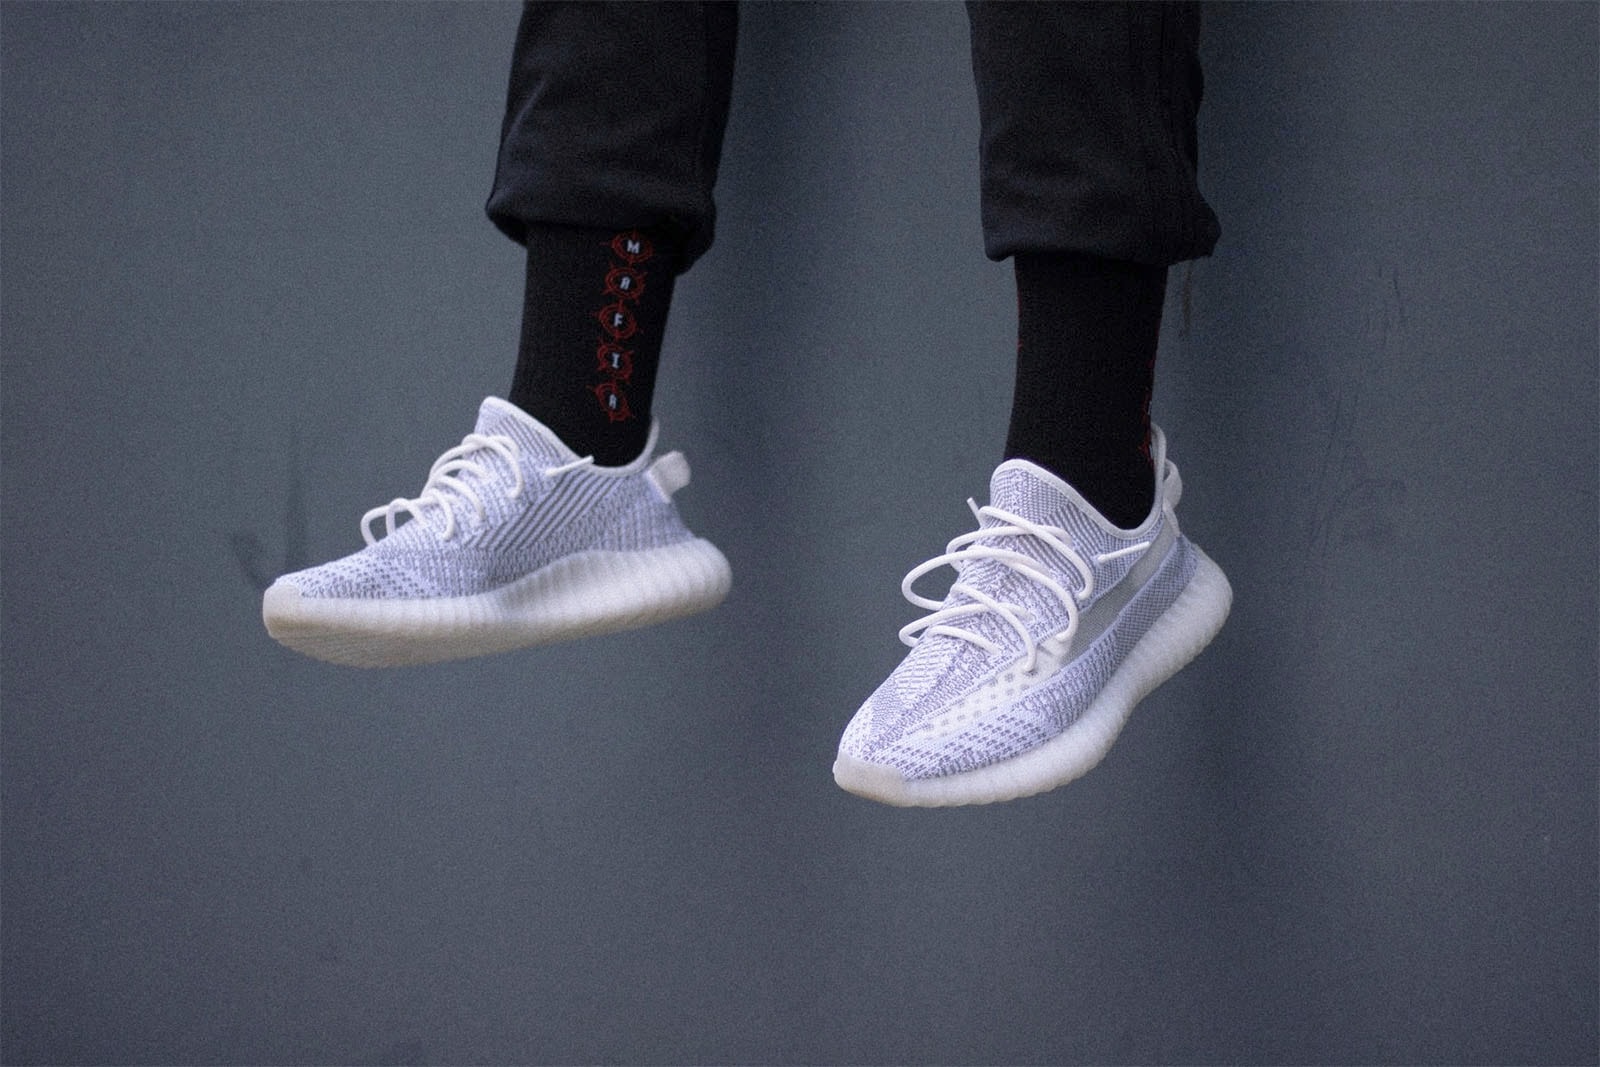 adidas YEEZY Boost 350 V2 Static Closer Look On Foot Purchase Buy Sneaker Kicks Trainers Shoes